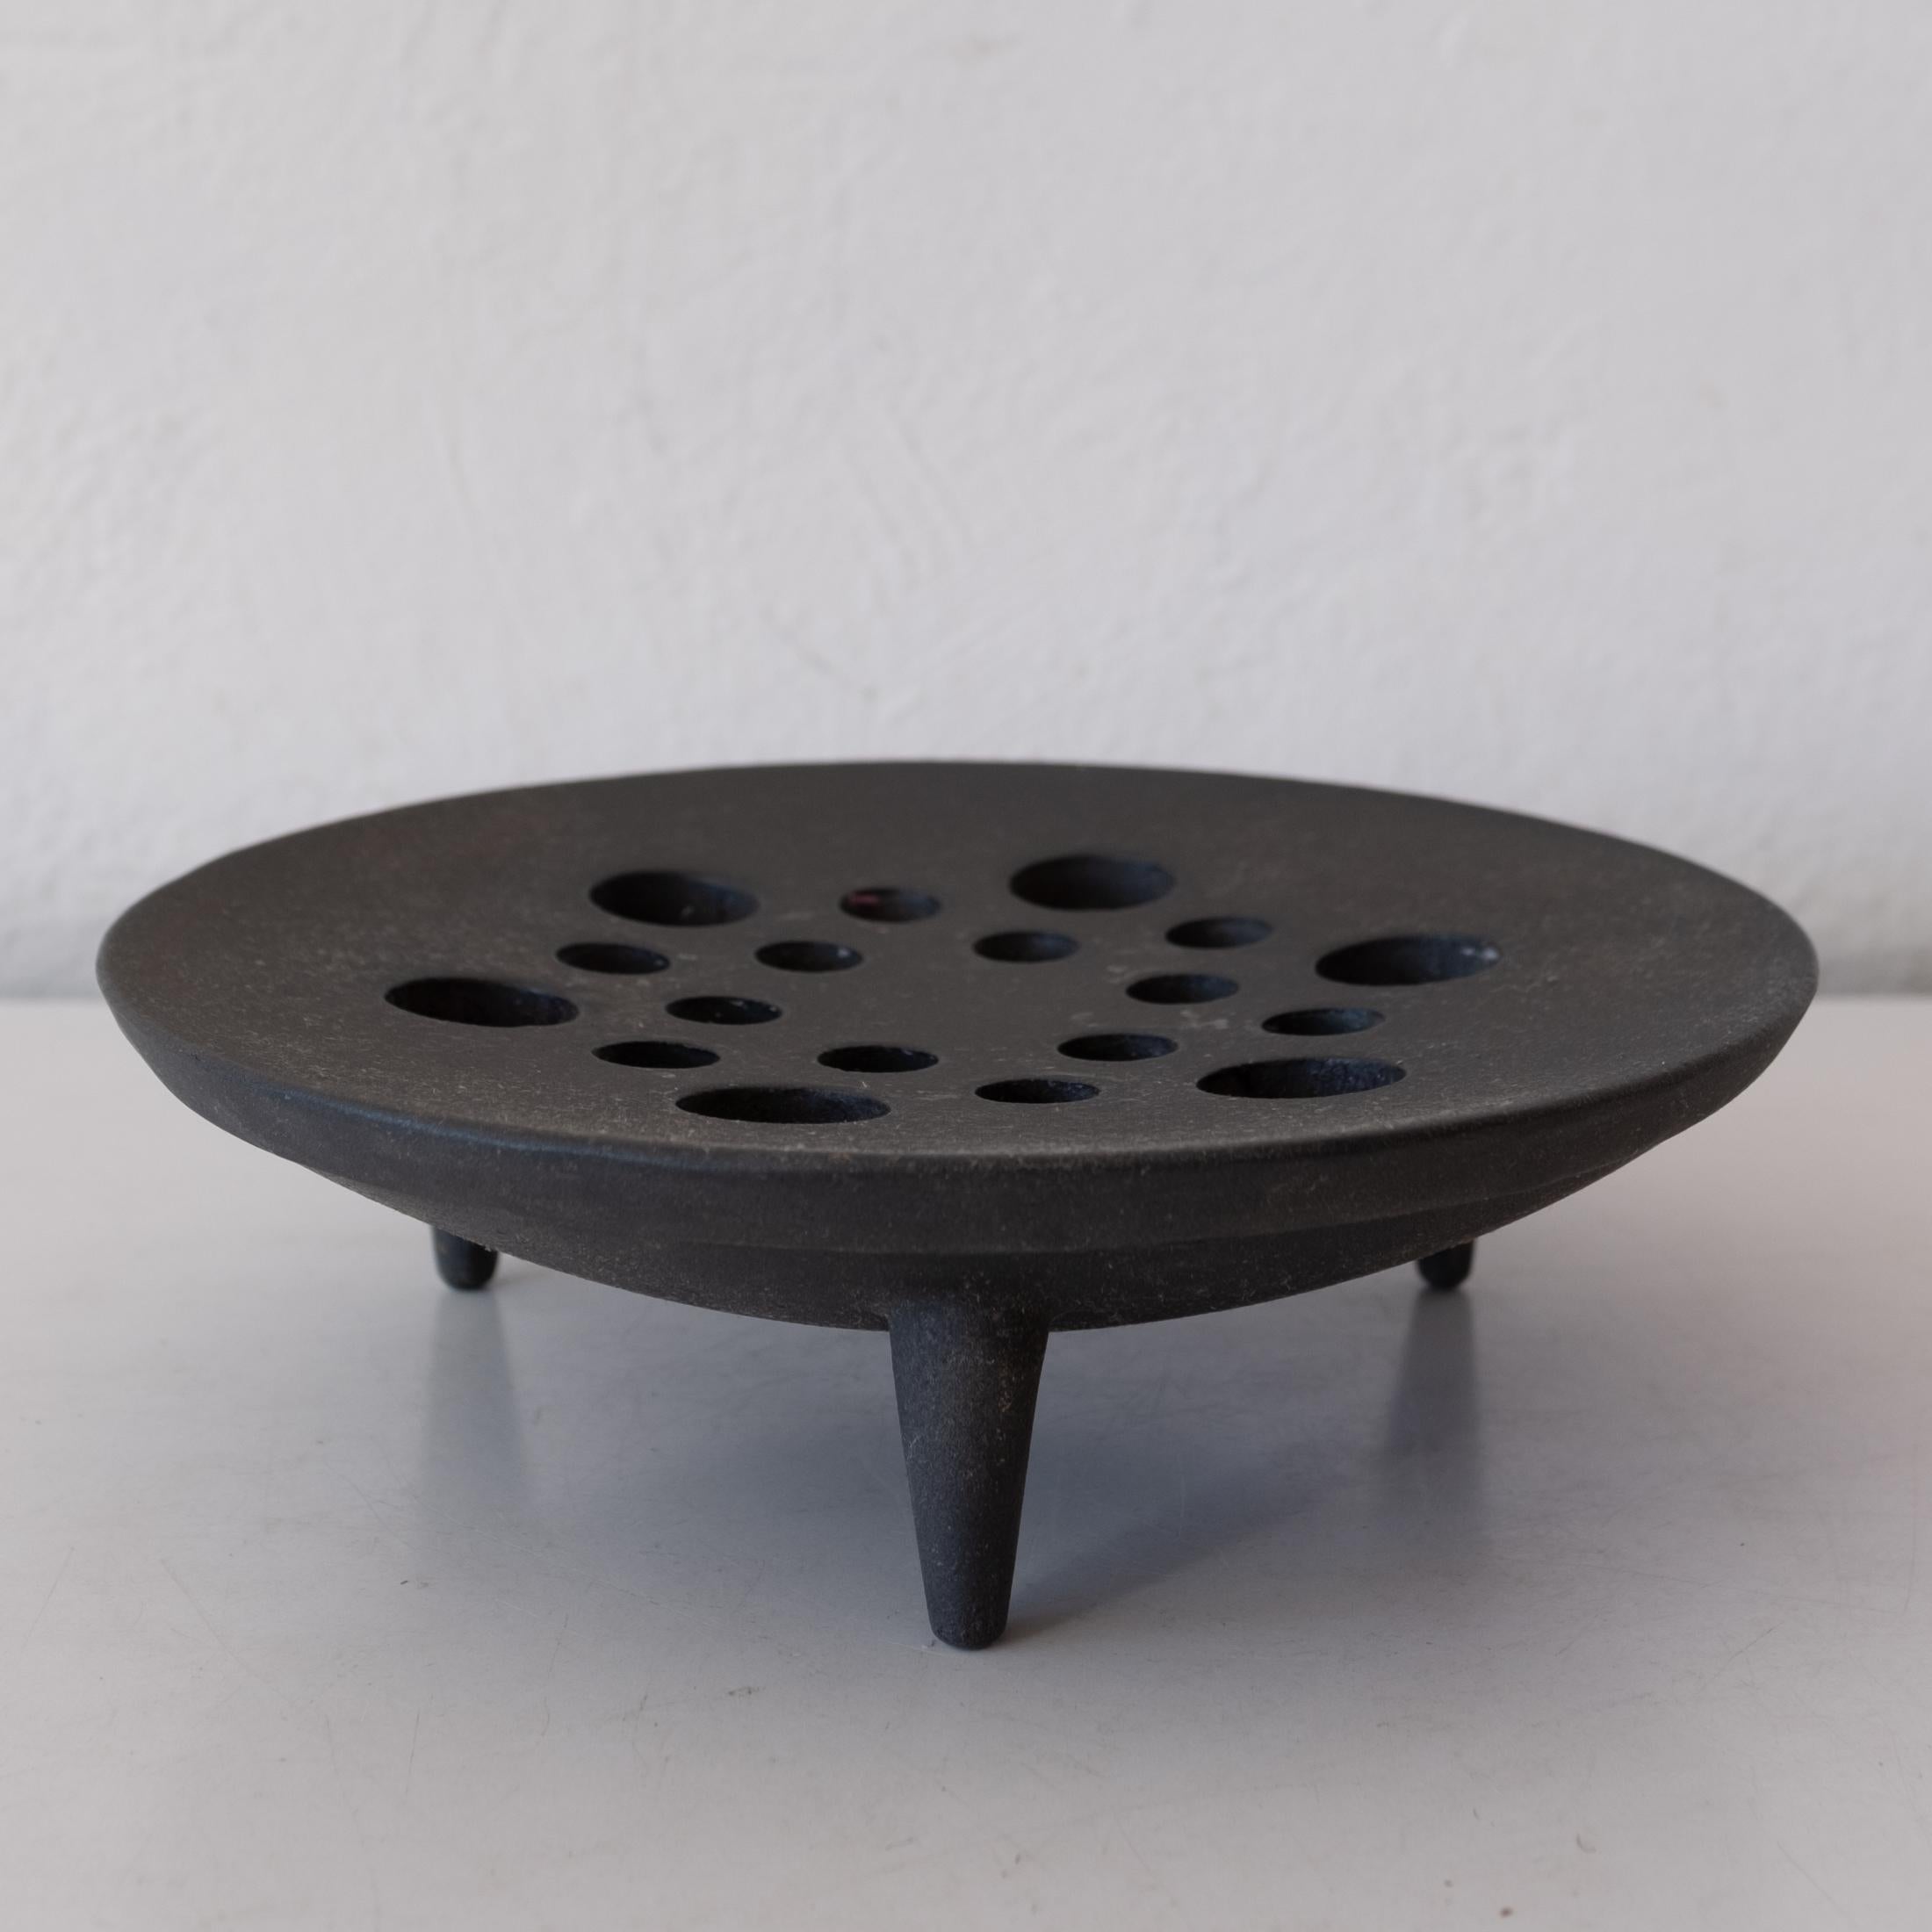 Jens Quistgaard tripod cast iron candle or incense holder by Dansk with original box. The modernist design looks great as just an object. 1950s. Made in Denmark.